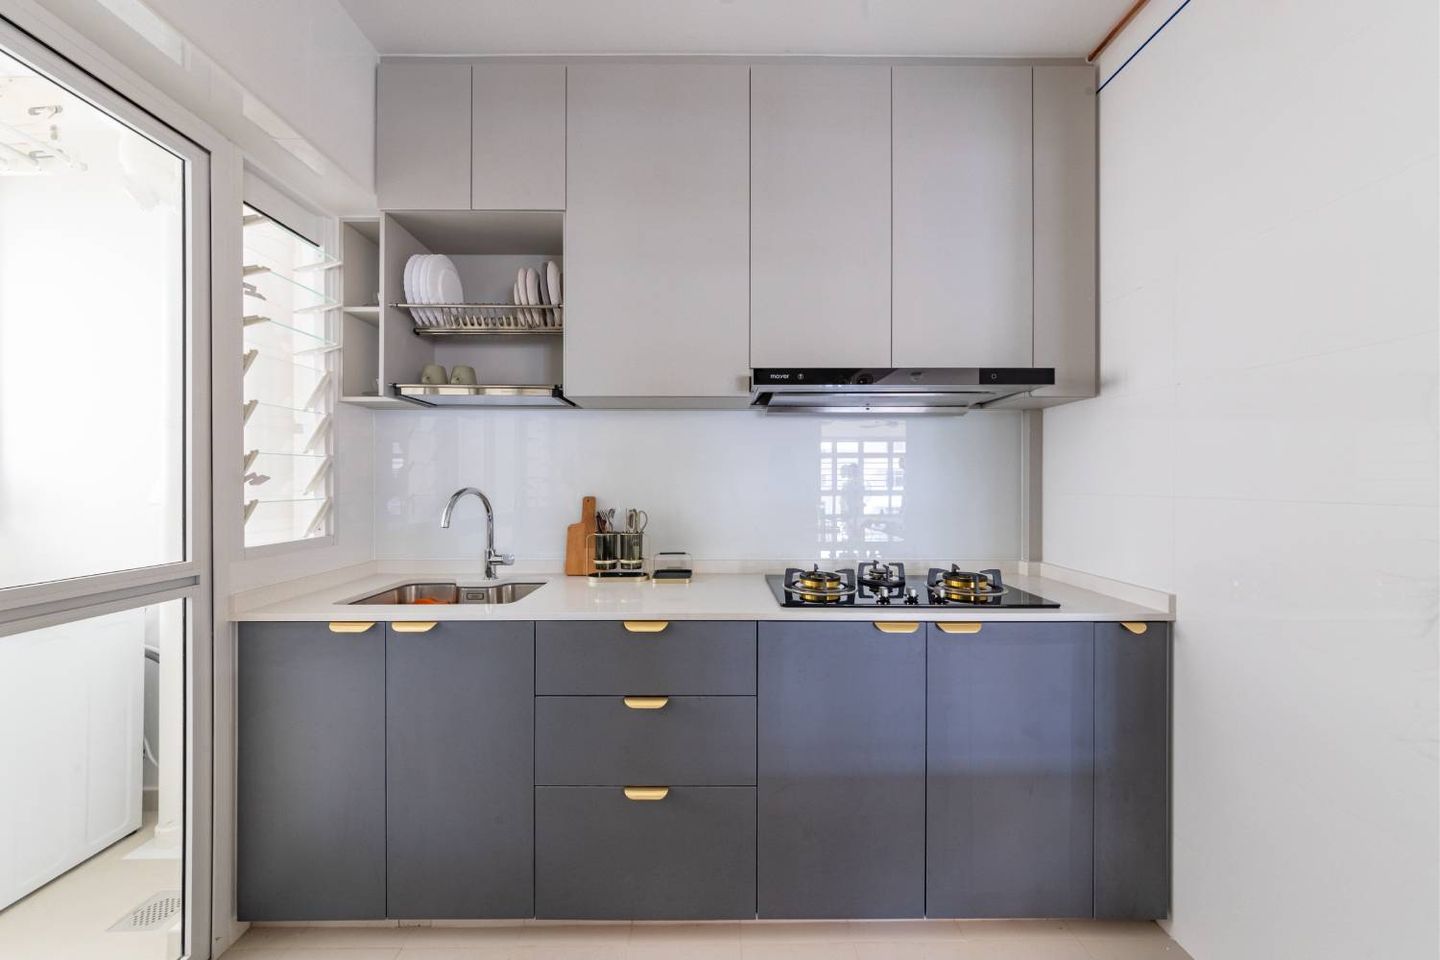 Compact Straight Kitchen with Dark Grey Floor Cabinets, Light Grey Wall Cabinets, Gold Handles, and White Countertop - Livspace